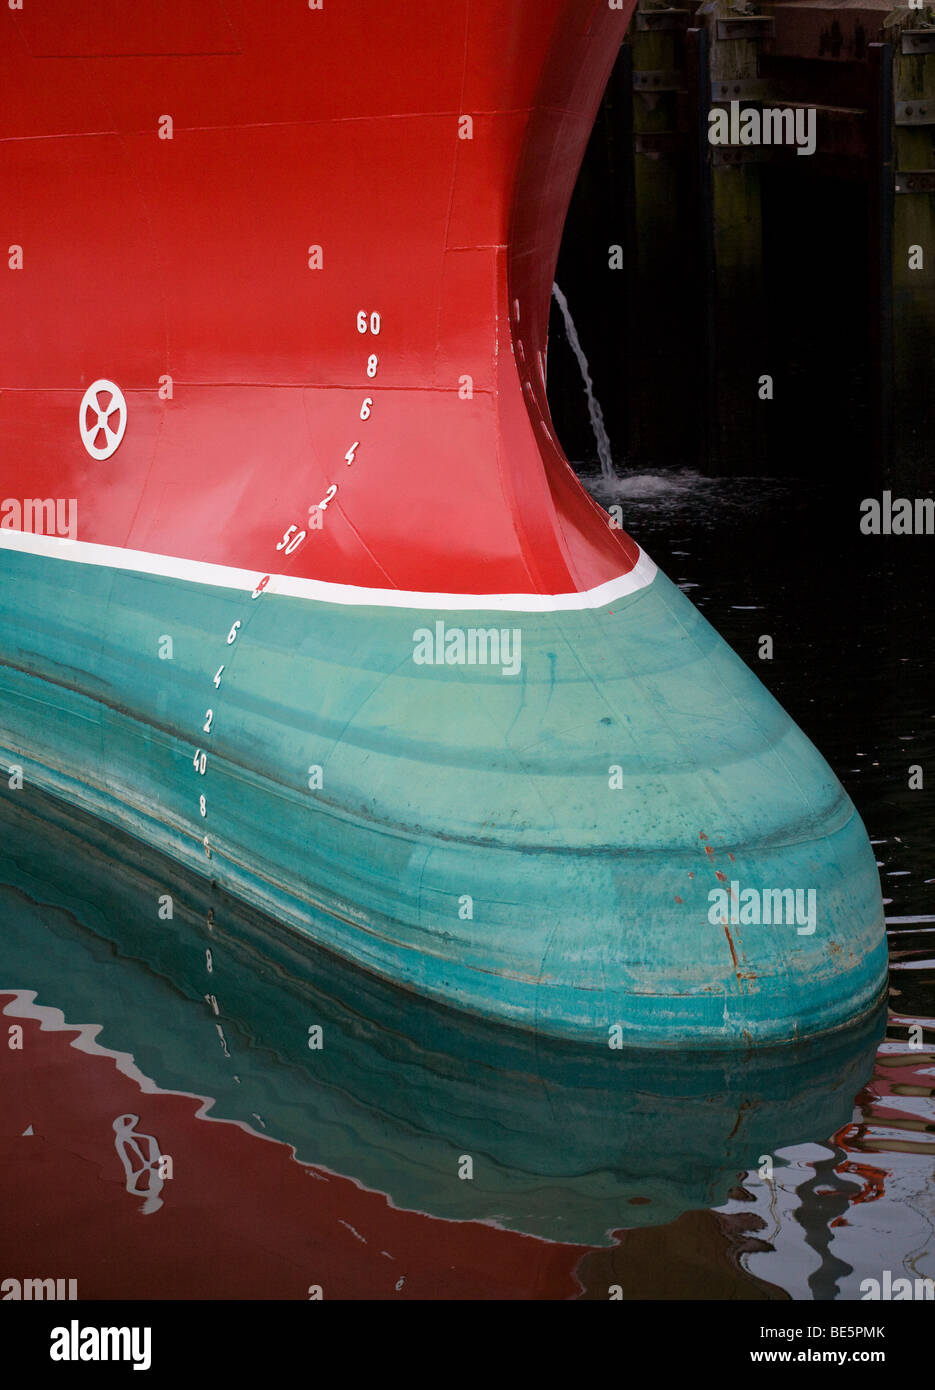 Bull Nose of a Deep Sea Fishing Trawler. A light load exposes the bull nosed prow of a large trawler red above and green below Stock Photo